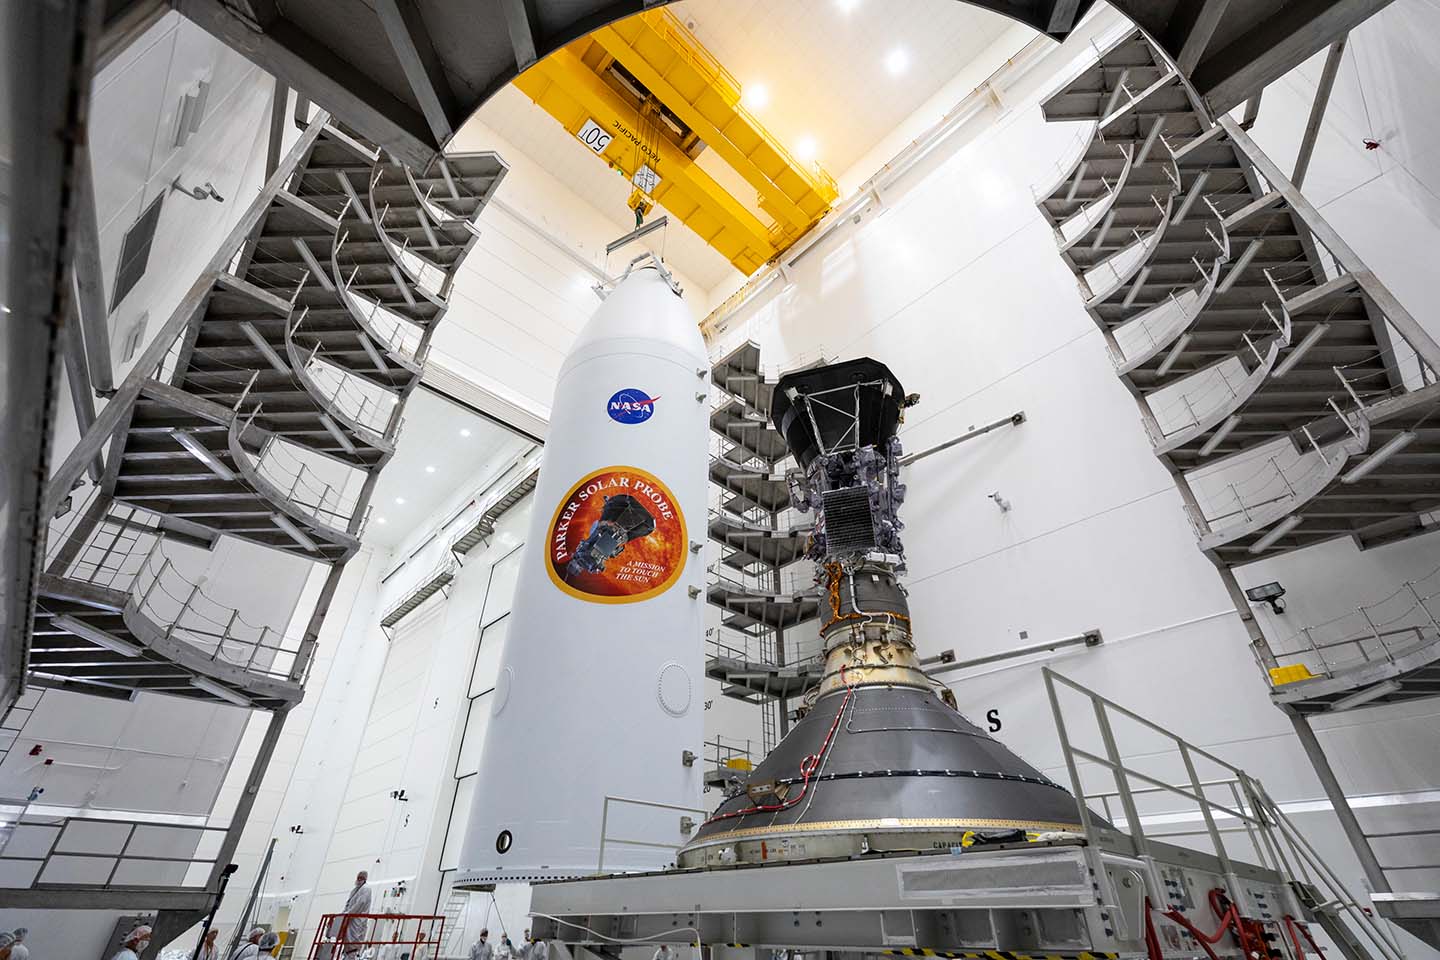 Parker Solar Probe, shown on July 16, 2018, is mounted atop its third stage rocket motor with one half of the 62.7-foot tall fairing that will encapsulate it